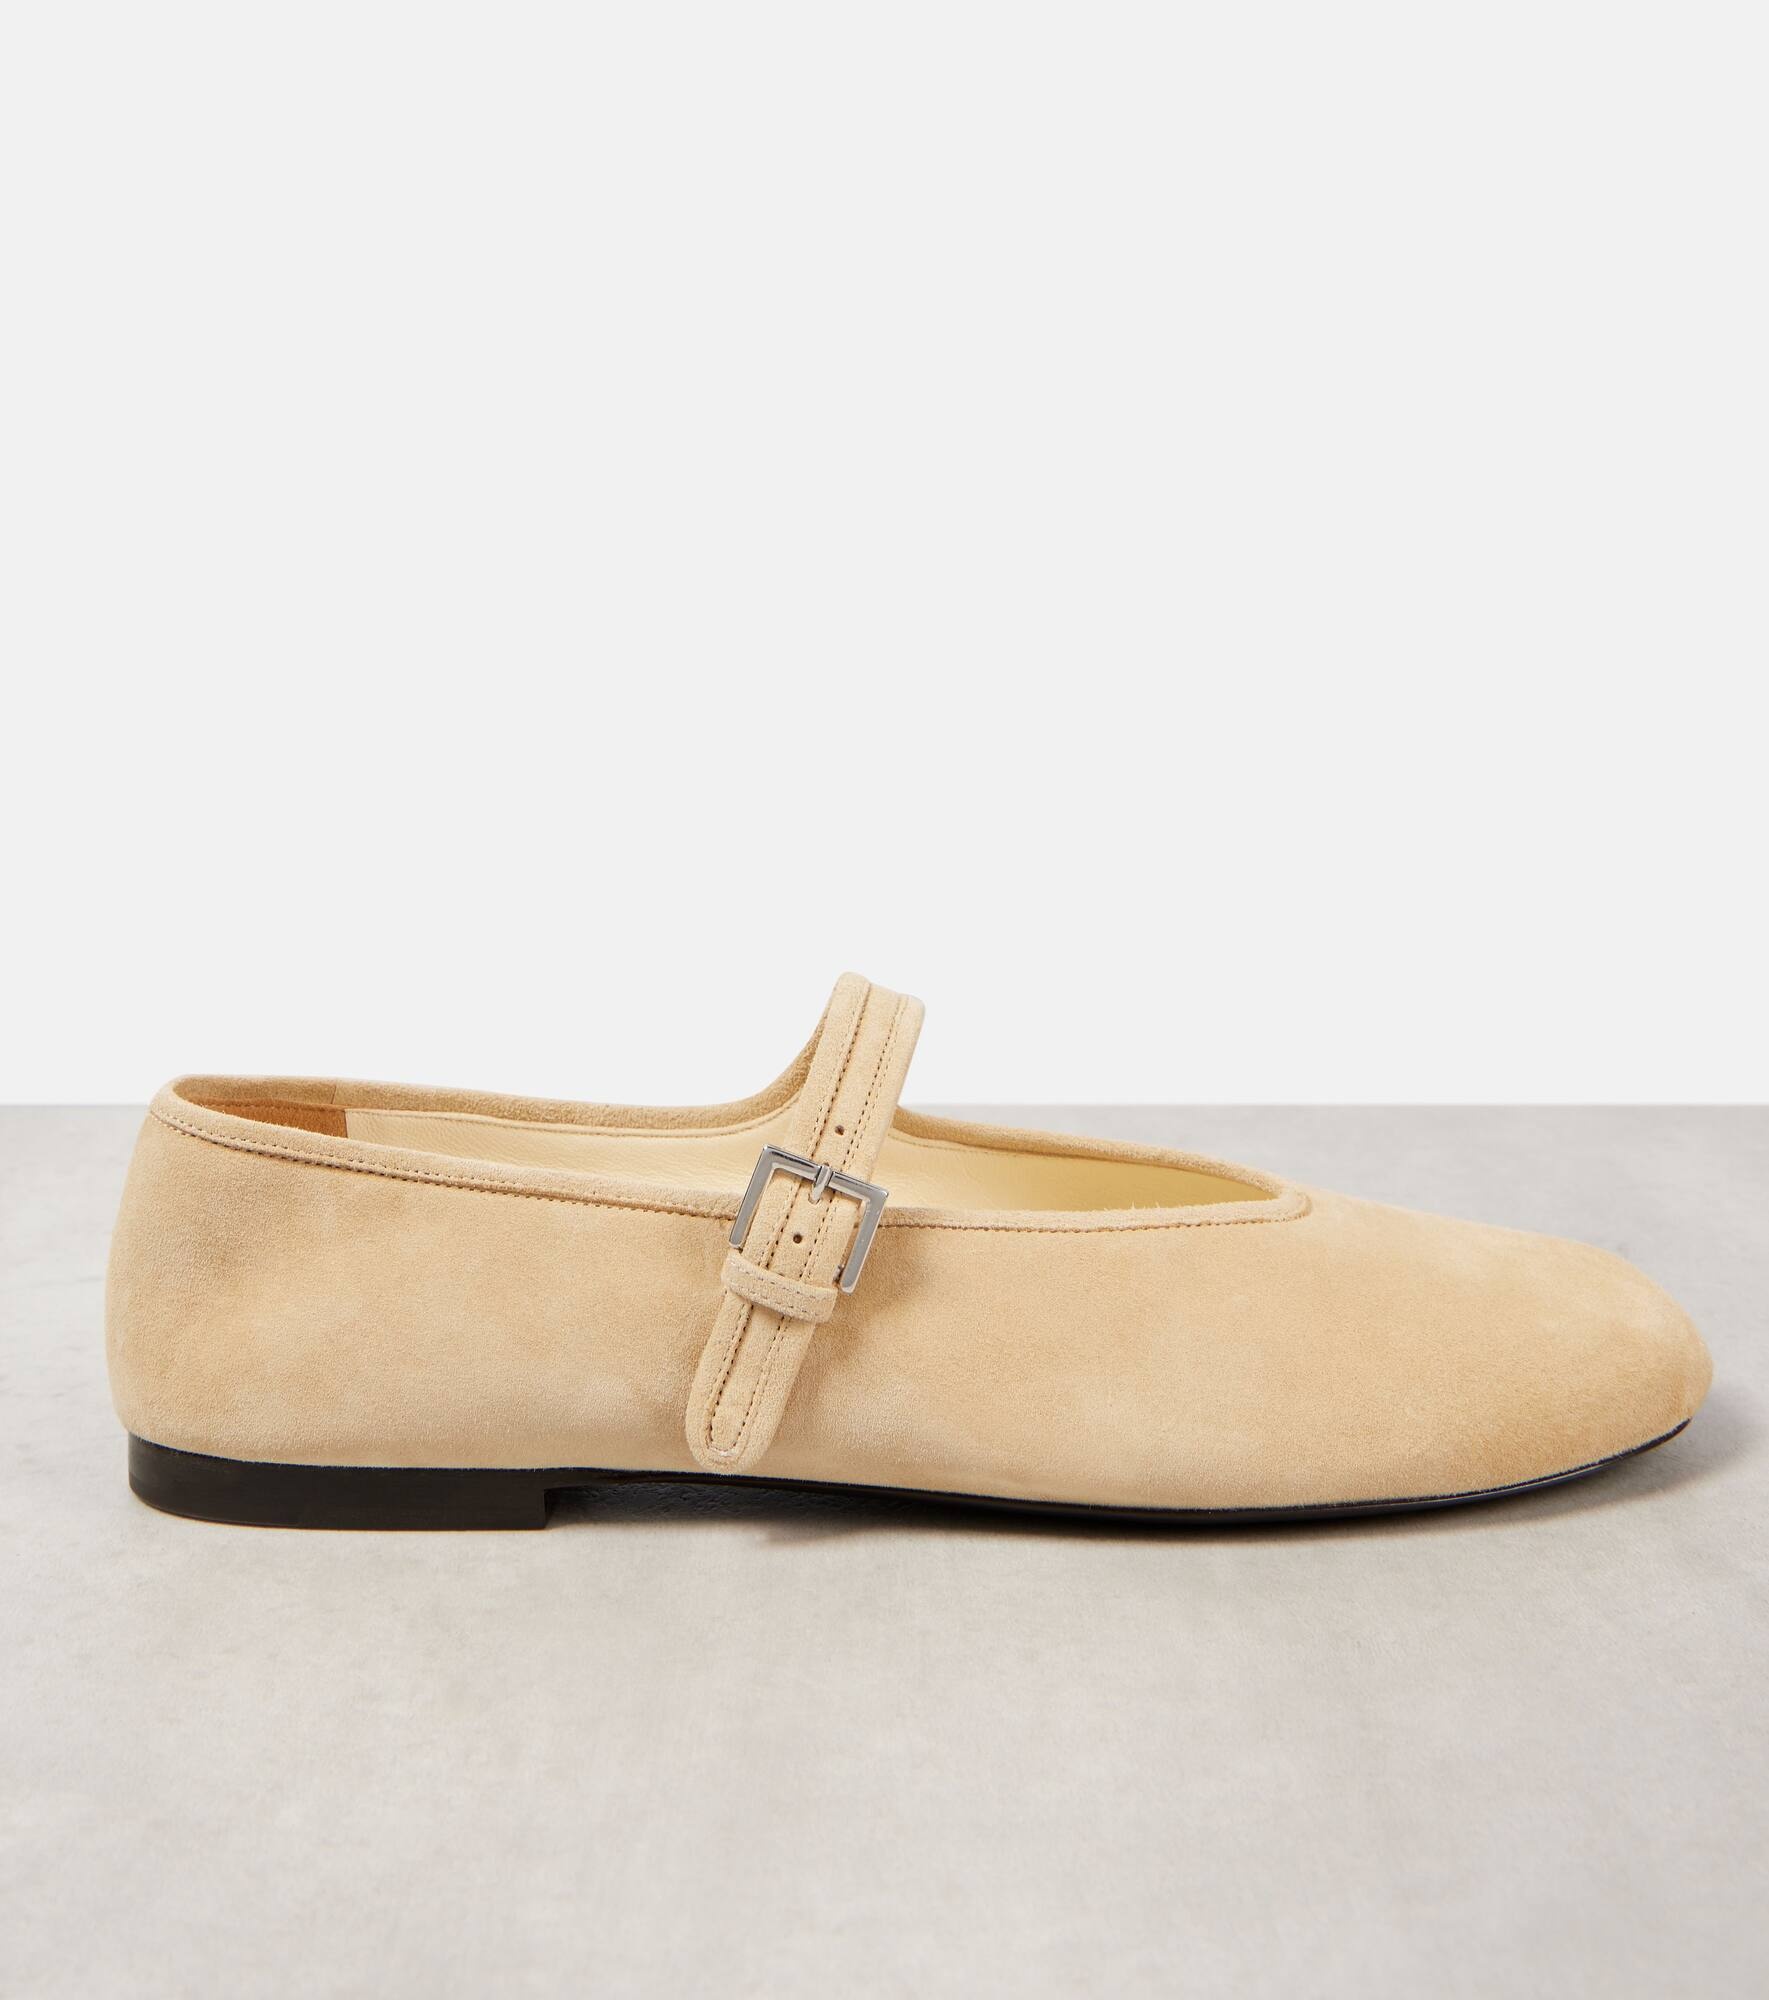 Suede Mary Jane flats - 4